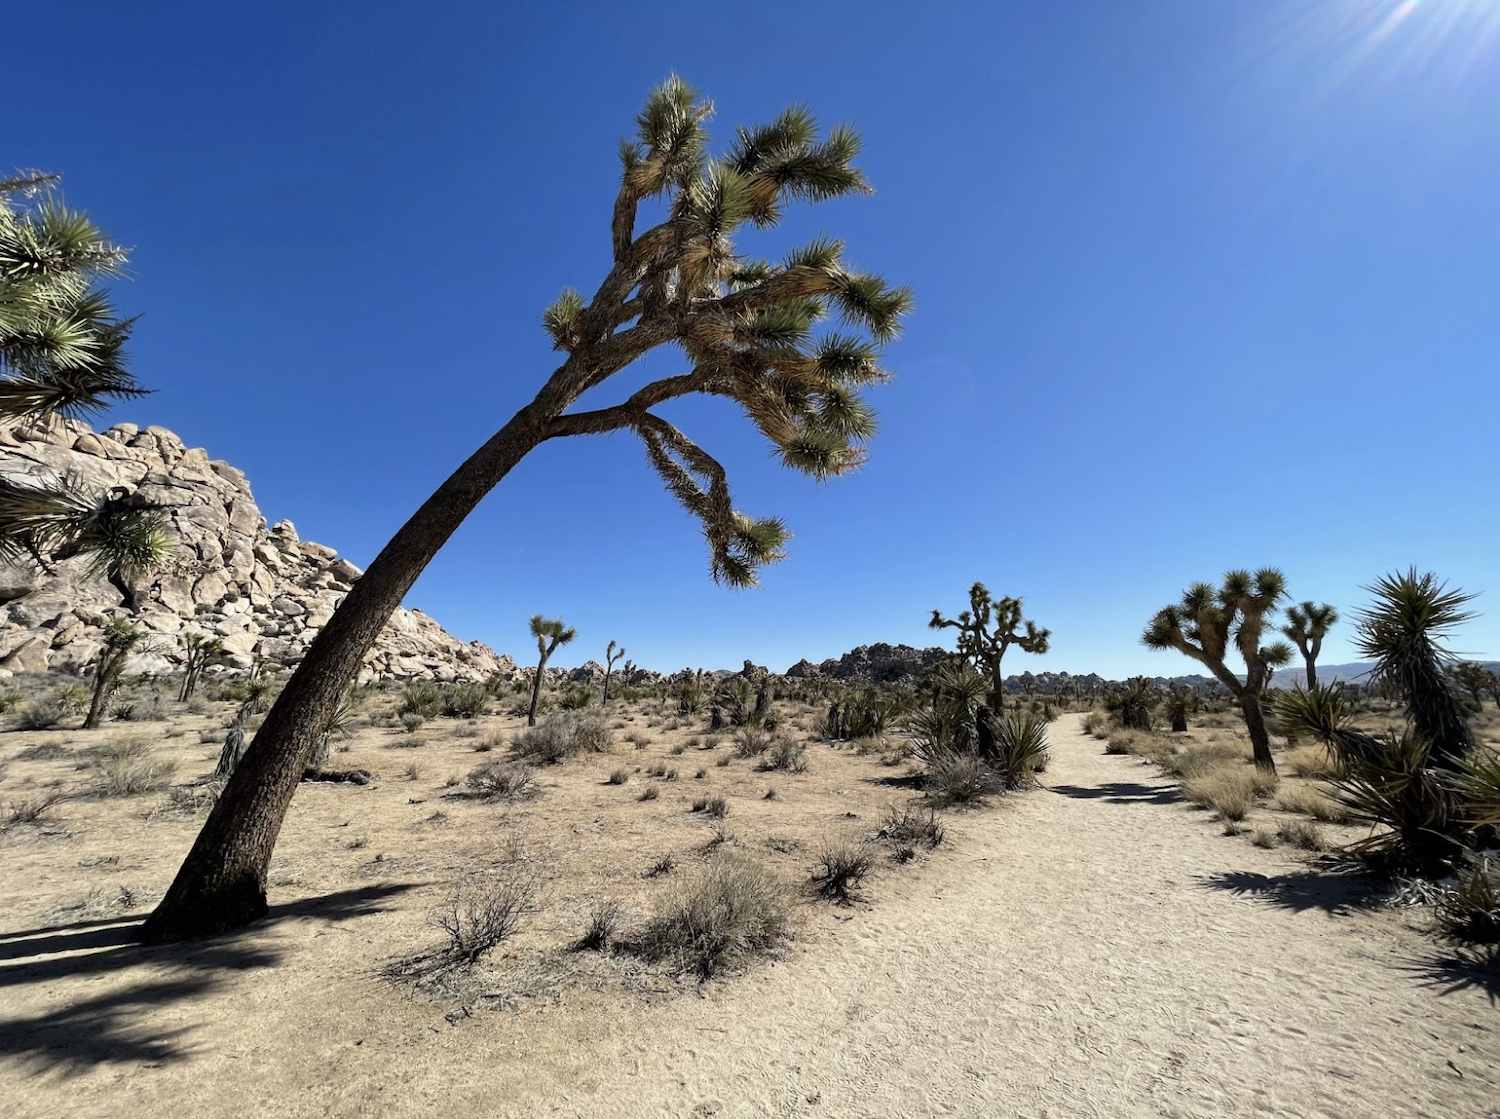 Putting the power of the sun into electric vehicles at Joshua Tree could be challenging/Sarh Guzick